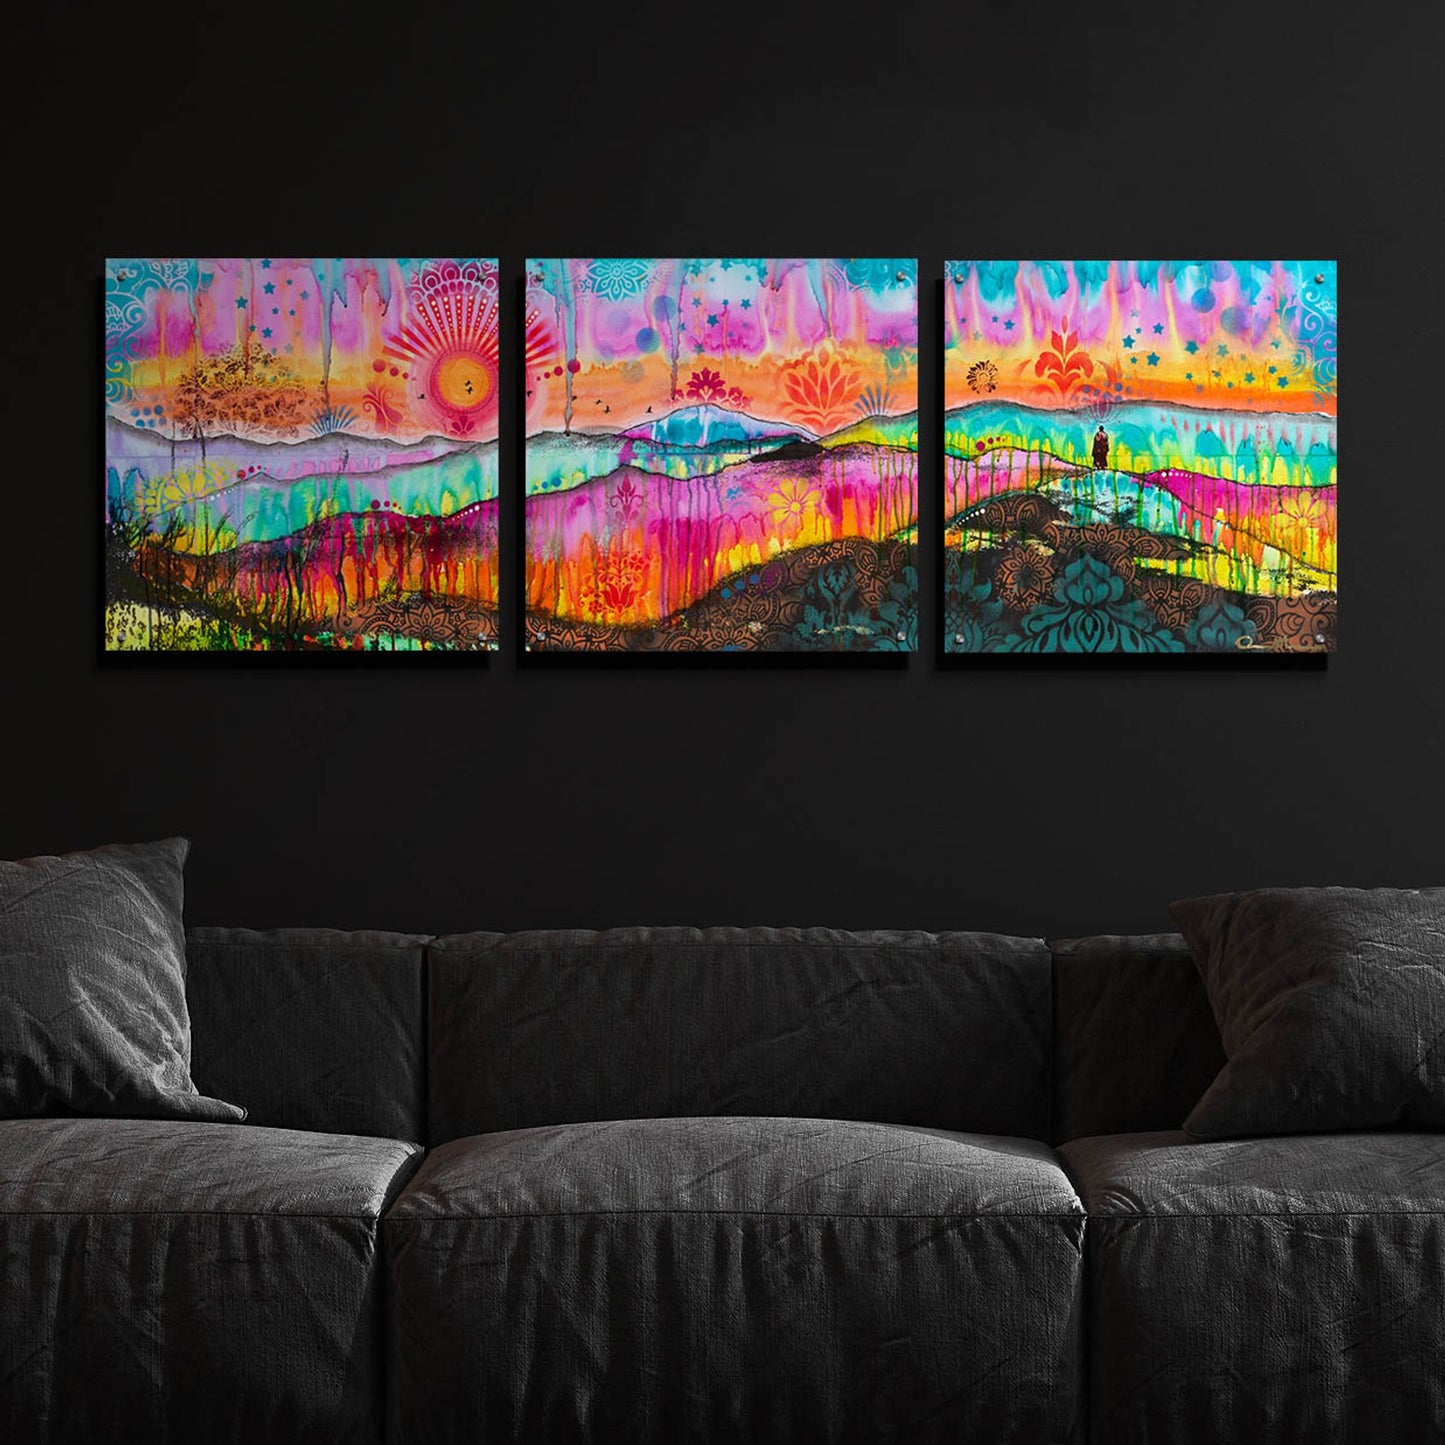 Epic Art 'The Wandering Monk' by Dean Russo, Acrylic Glass Wall Art, 3 Piece Set,72x24